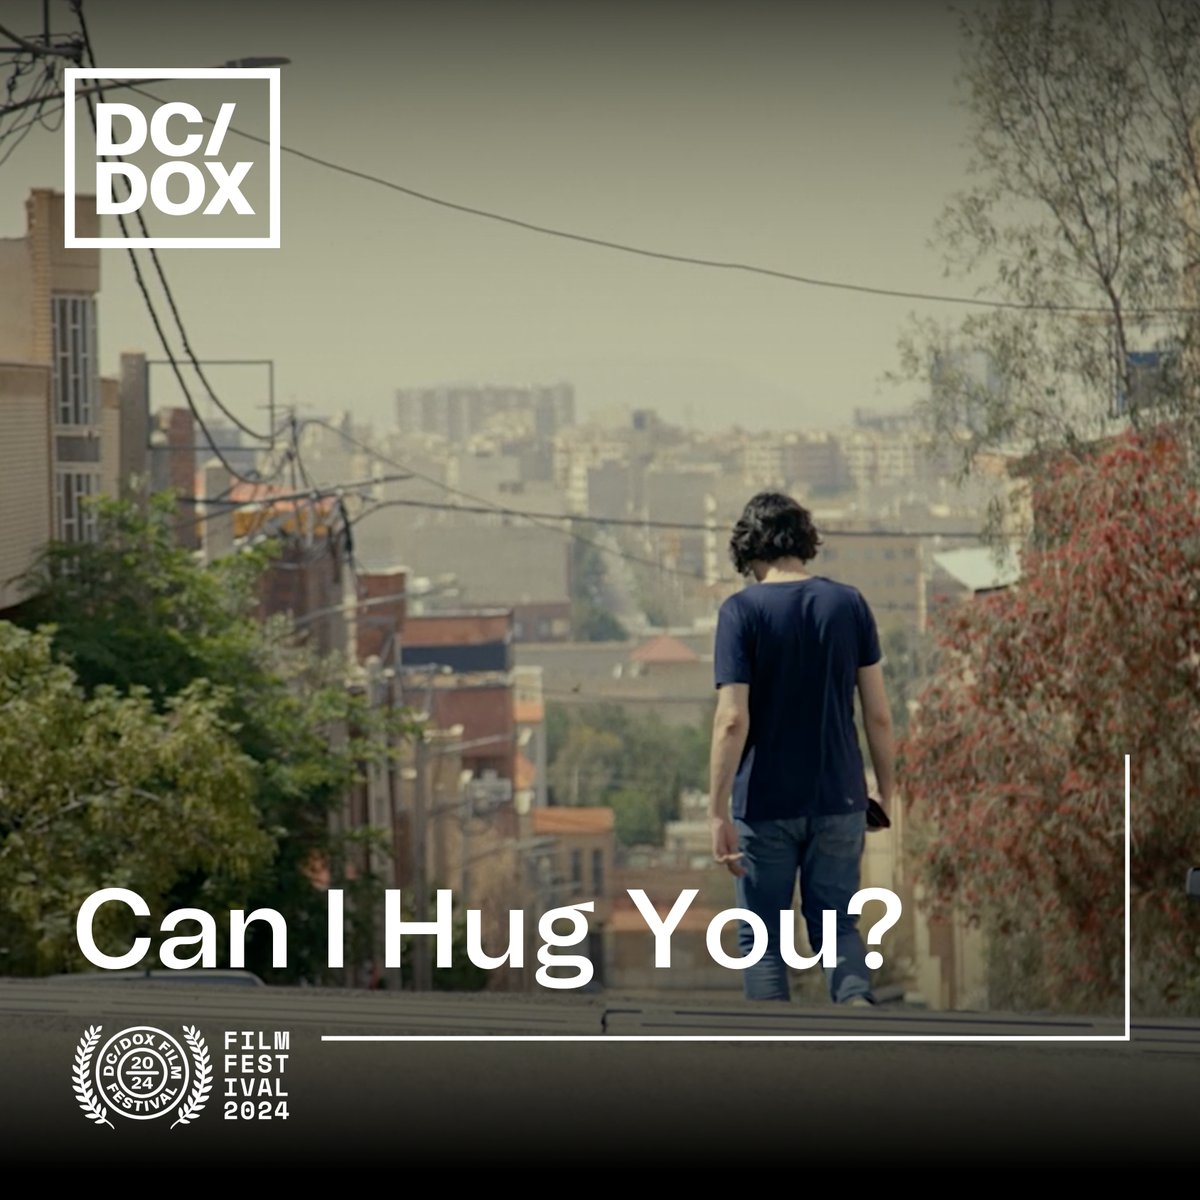 #SIMA2024 Best Short Documentary Winner, CAN I HUG YOU? by Elahe Esmaili will be premiering in DC with our partner @dcdoxfest on June 16 as part of their 'Shorts Program: The Ties That Bind'. Get your tickets now!: dcdoxfest.com/films/can-i-hu… #dcdoxfest